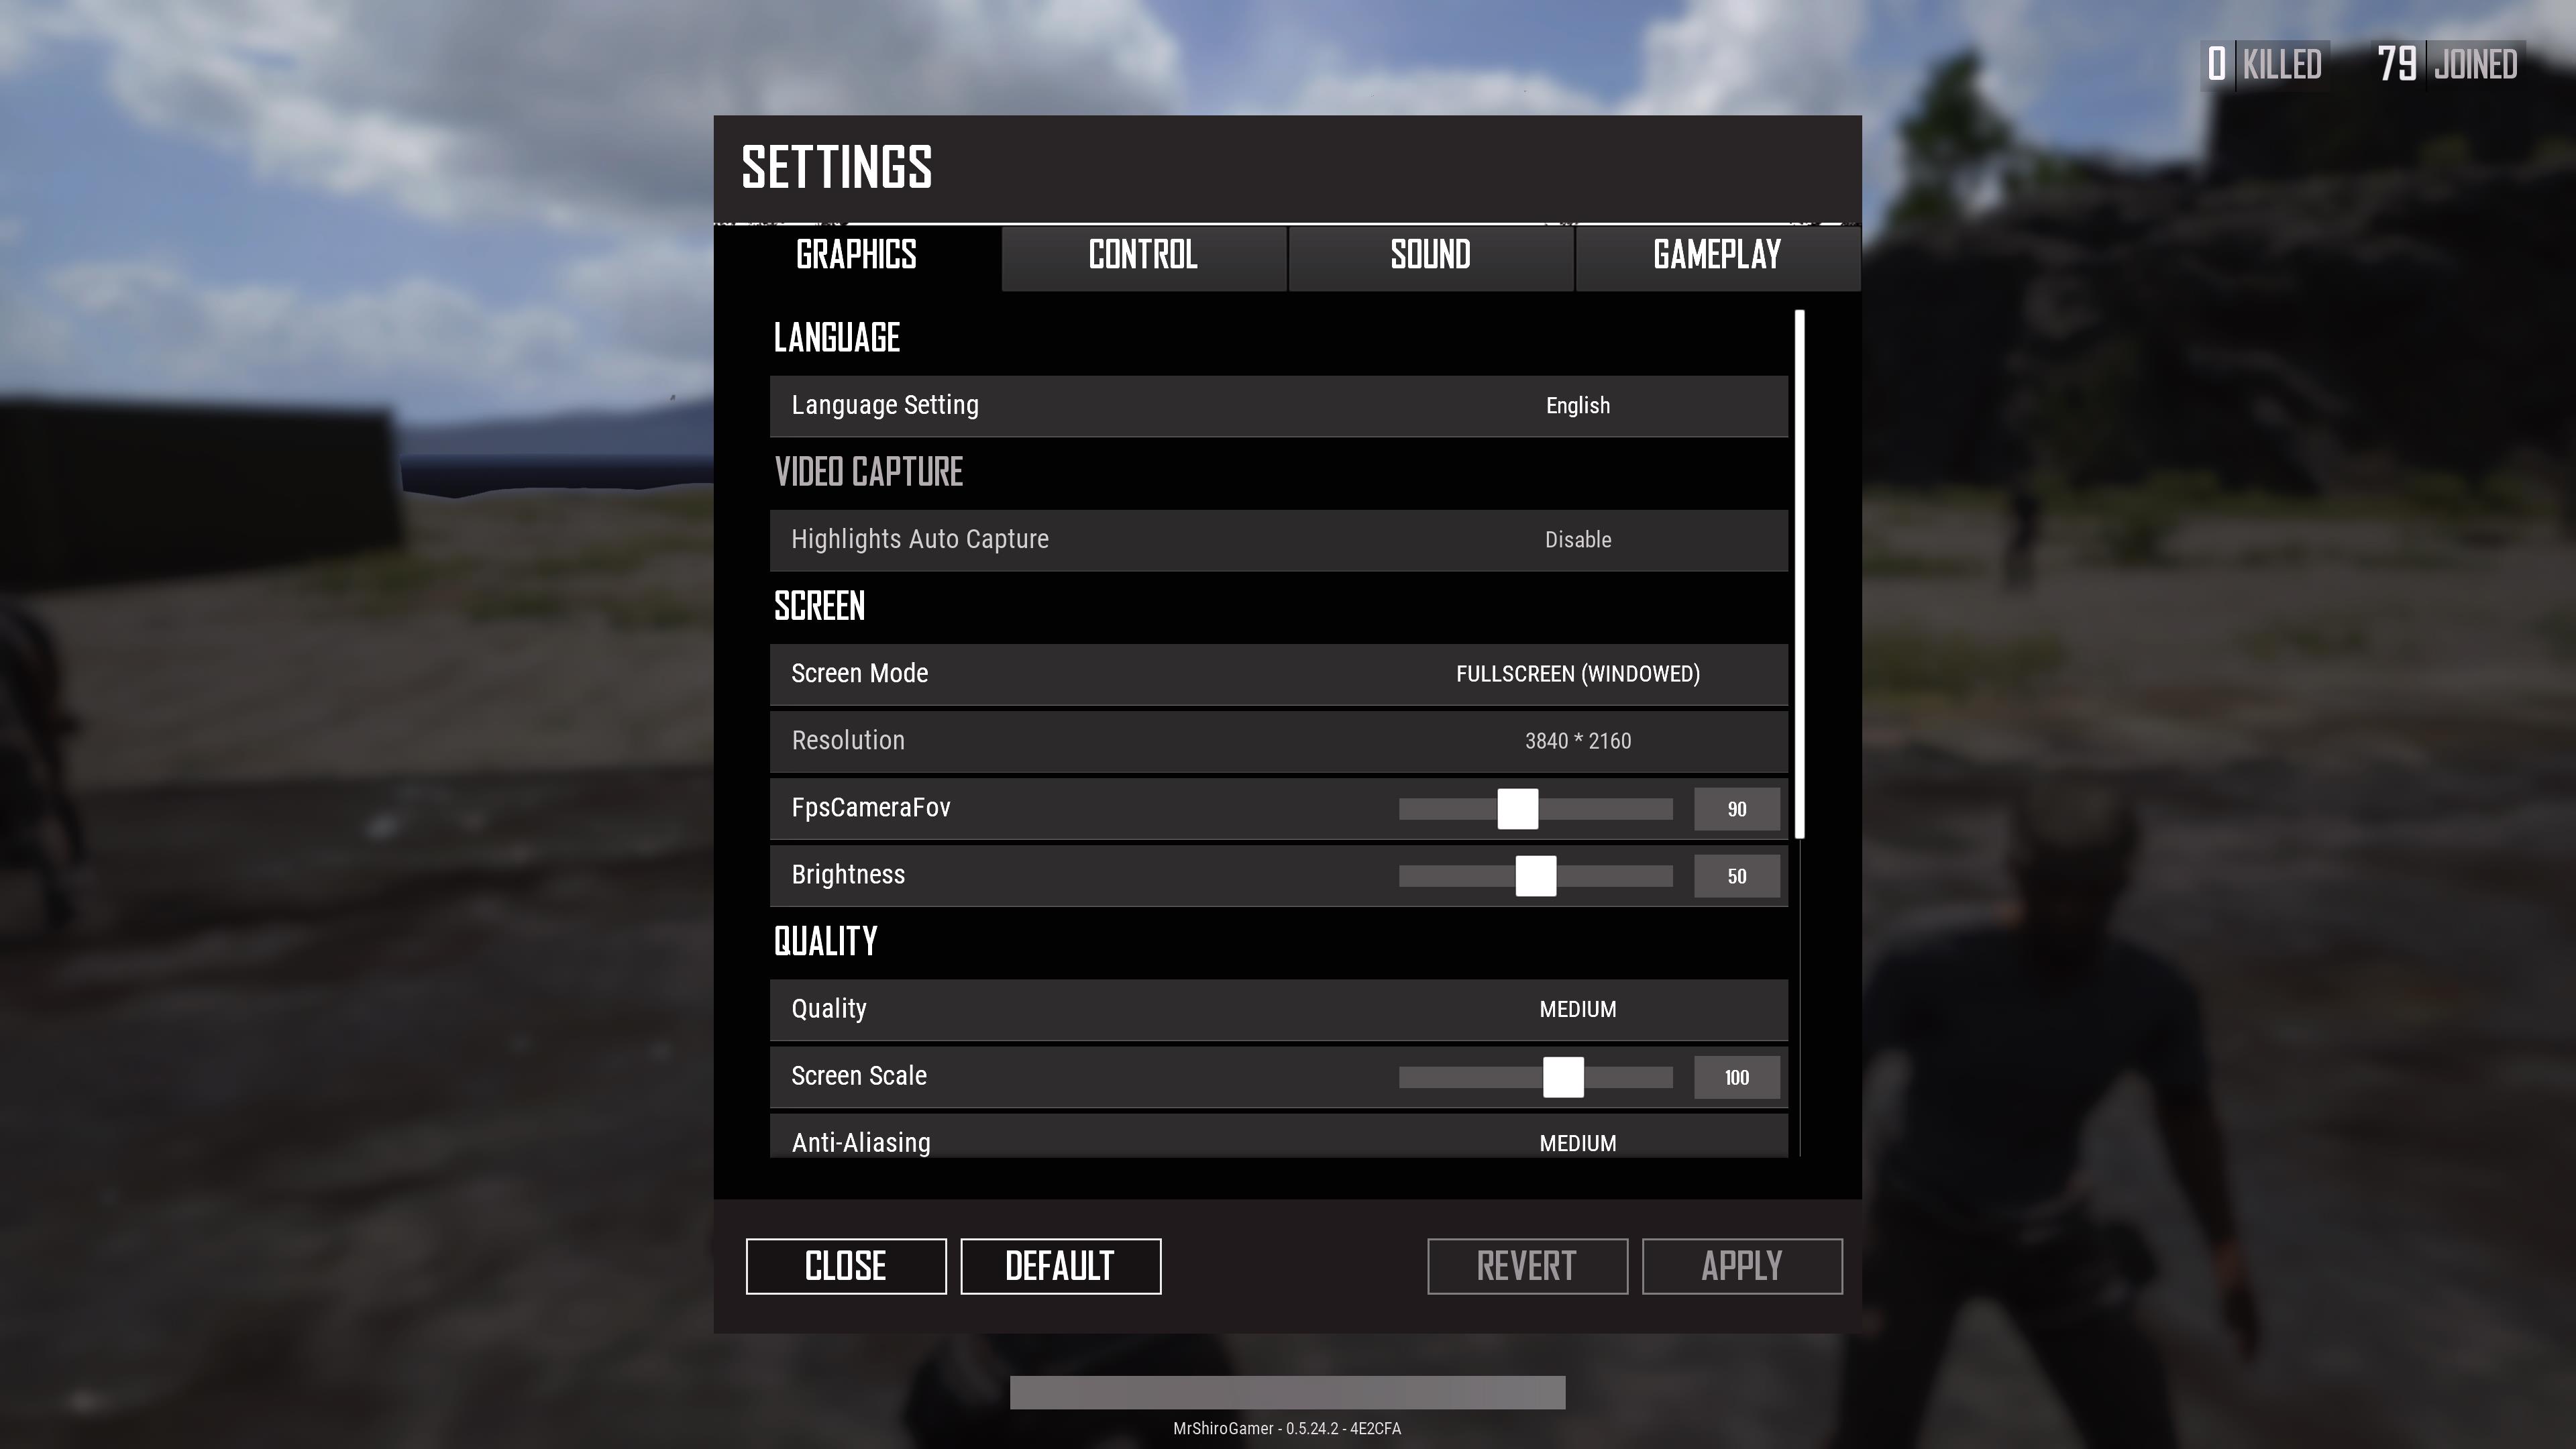 Pubg For Xbox One Recognizes Keyboard And Gives To Watch Graphics Settings